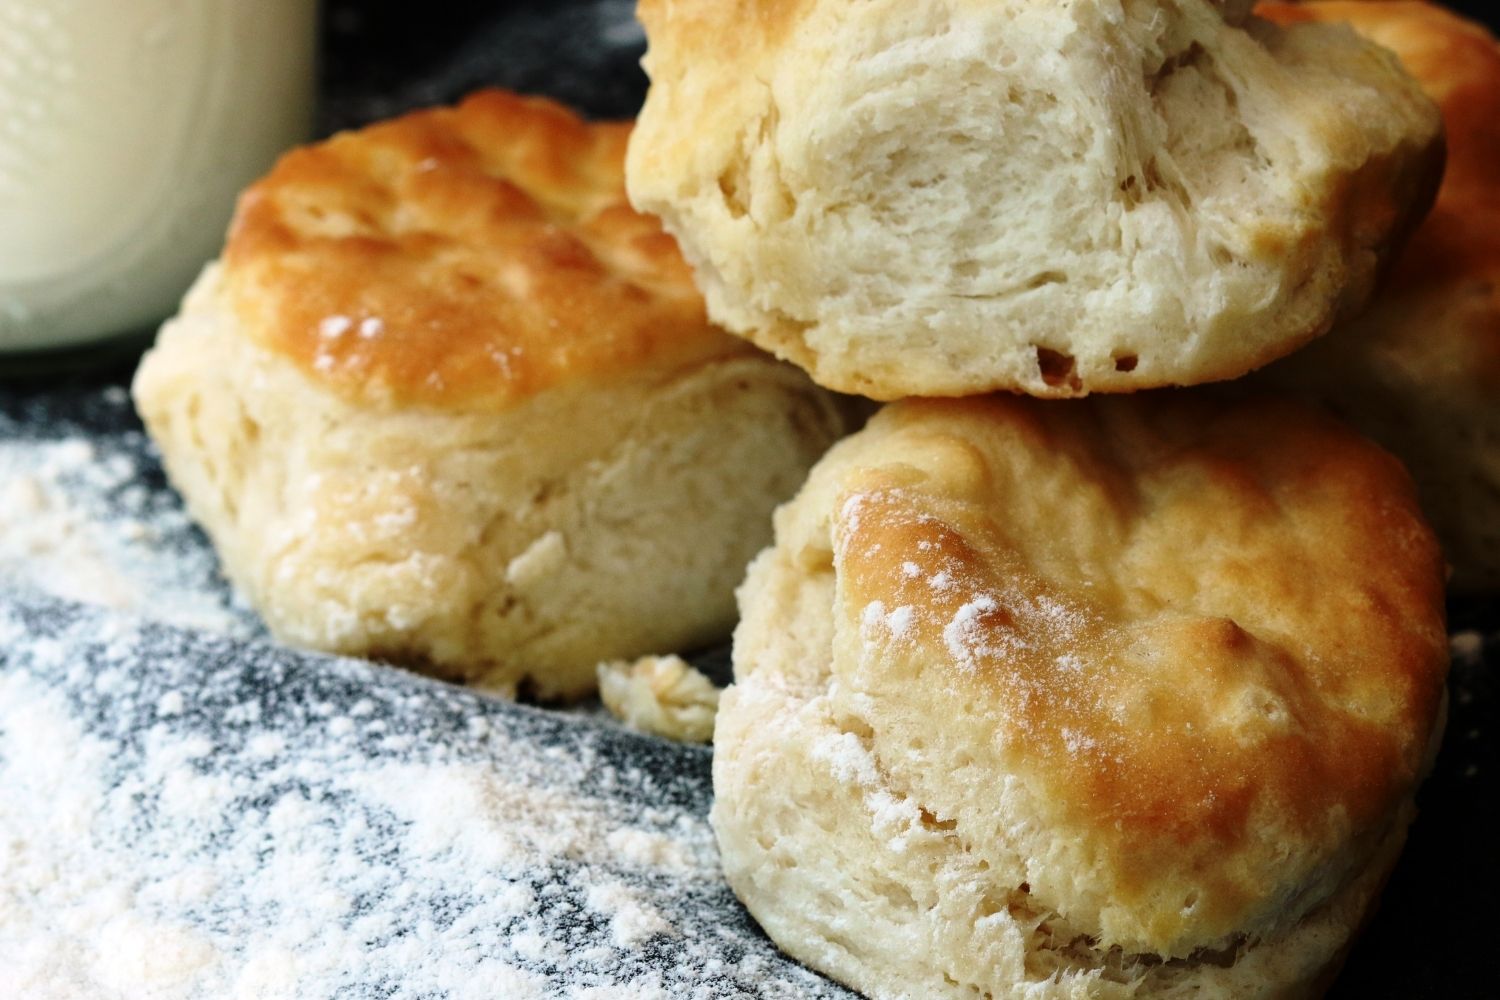 Biscuits are a classic southern staple